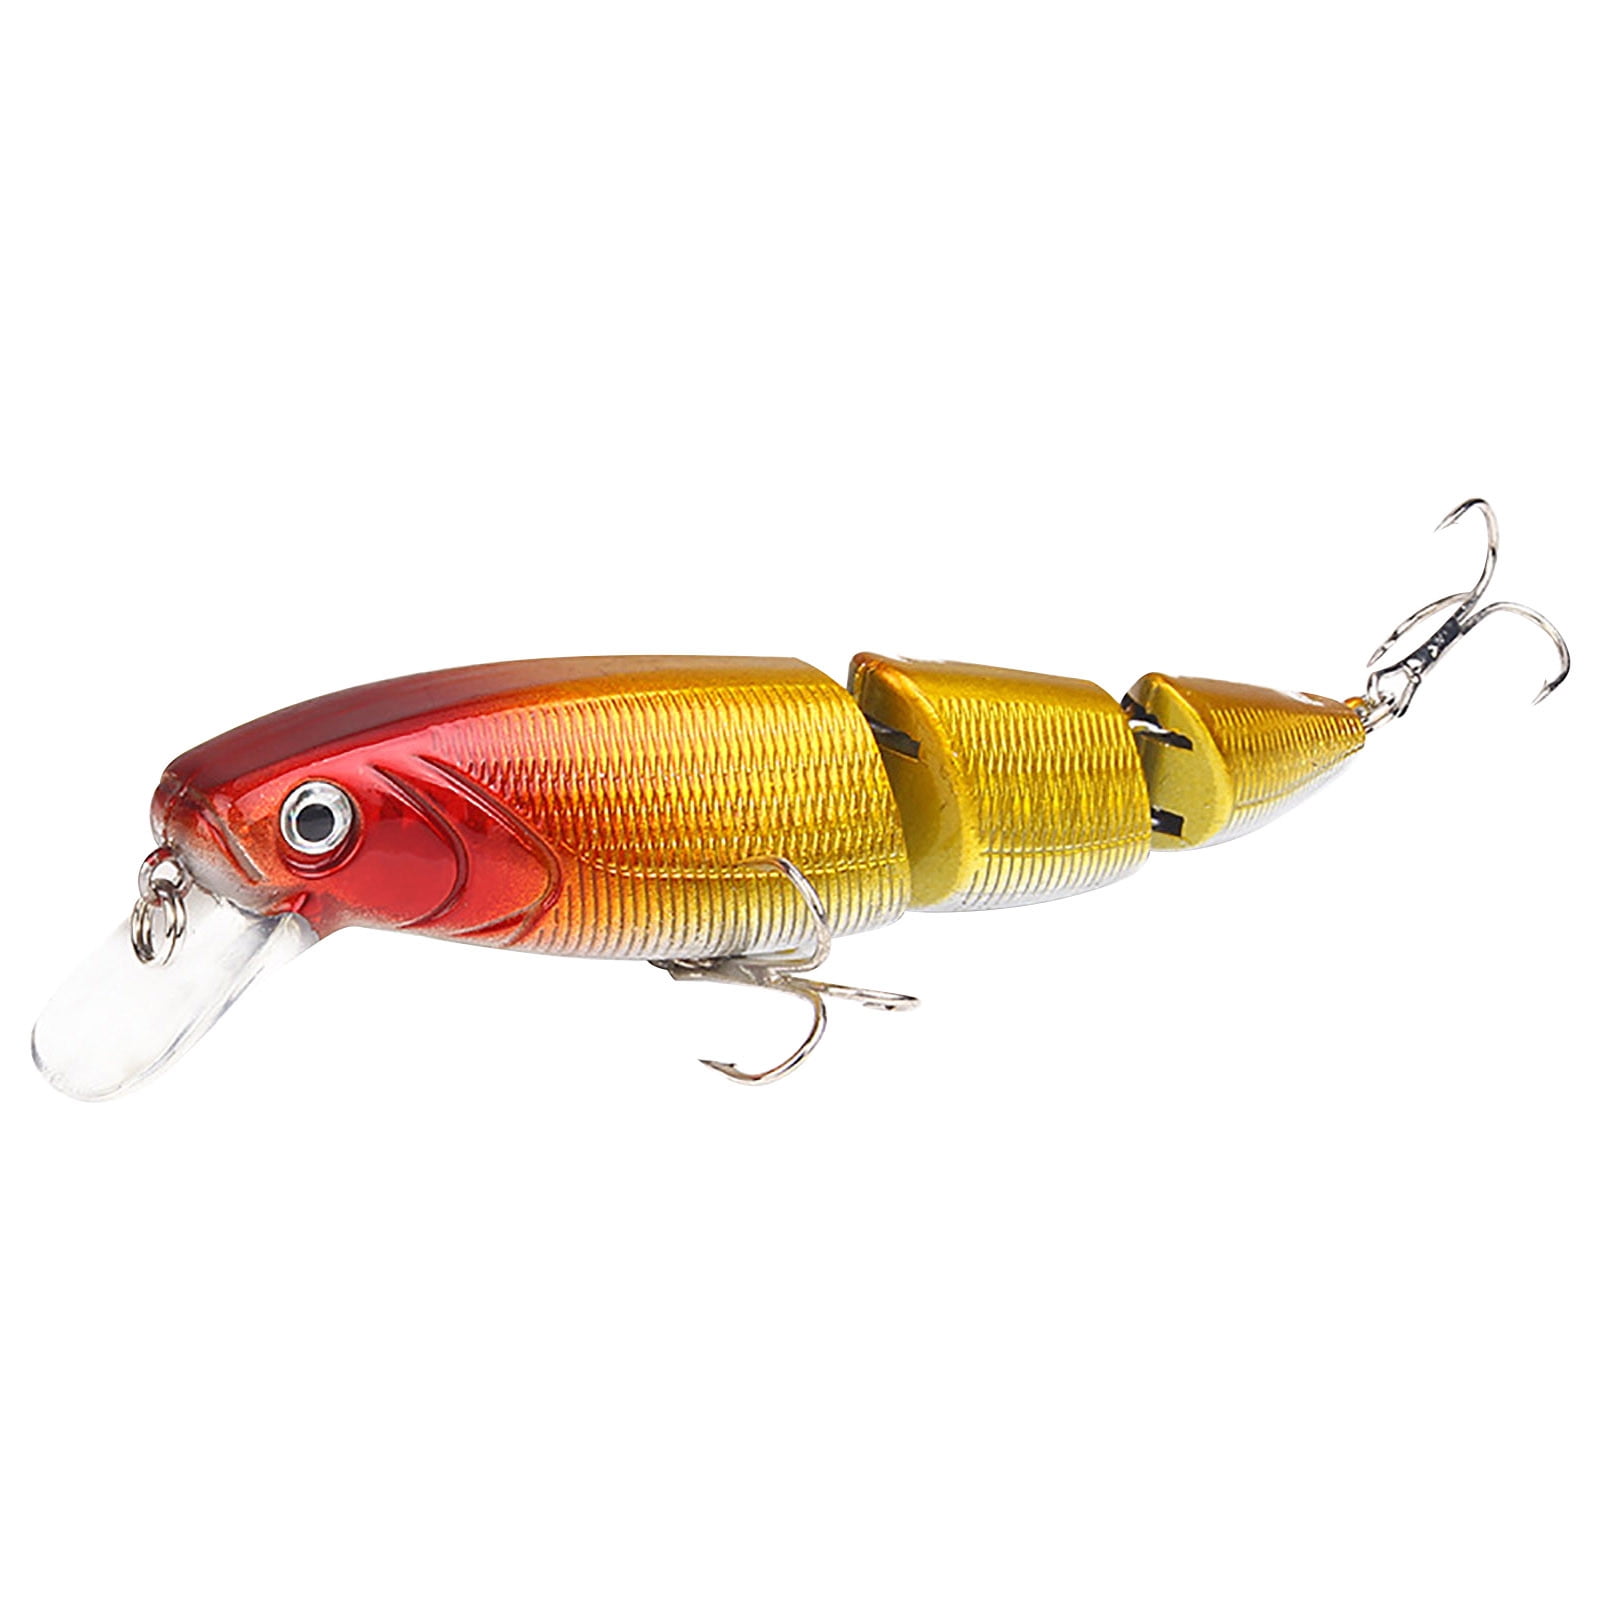 Fishing On Clearance New Fishing Lures Baits Hooks Tackle Fishing Baits  Tackle Outdoor Fishing Gear